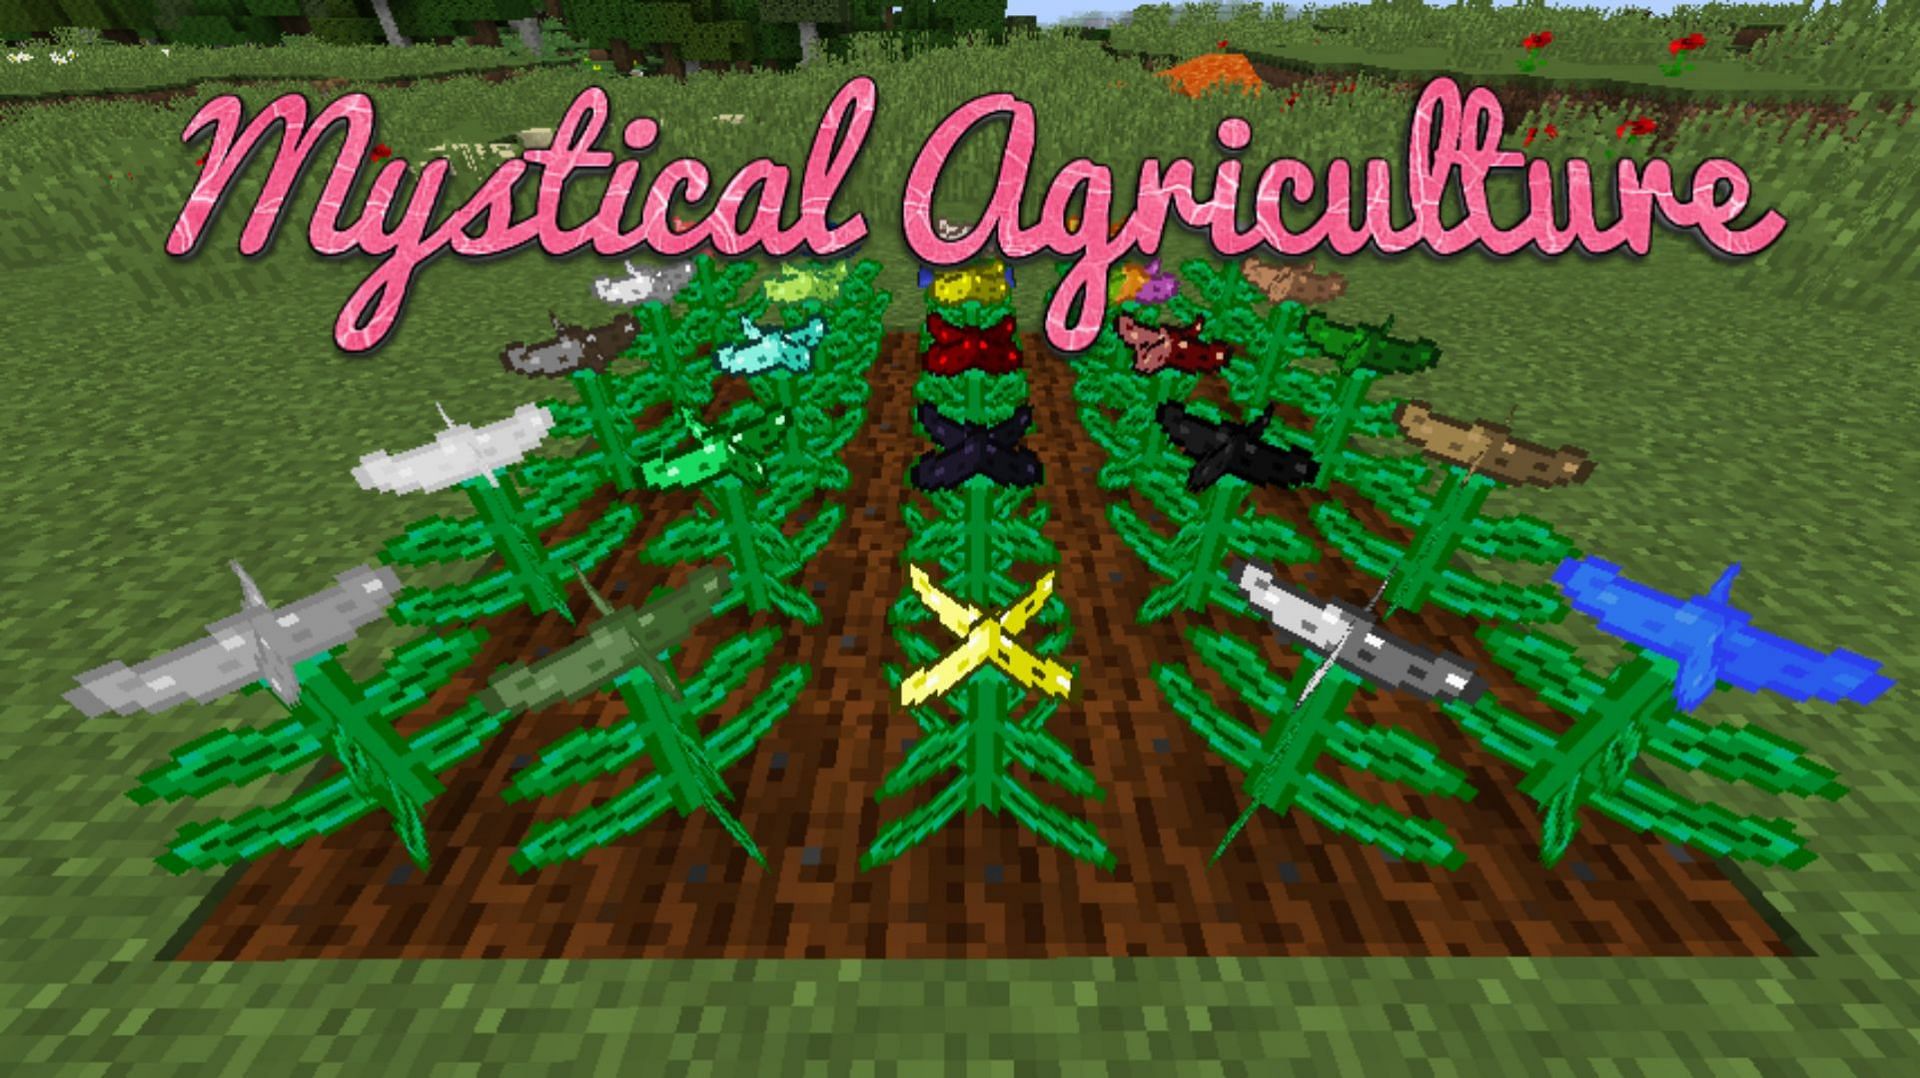 Mystical Agriculture adds various new crops and ties resources with farming in Minecraft (Image via CurseForge)